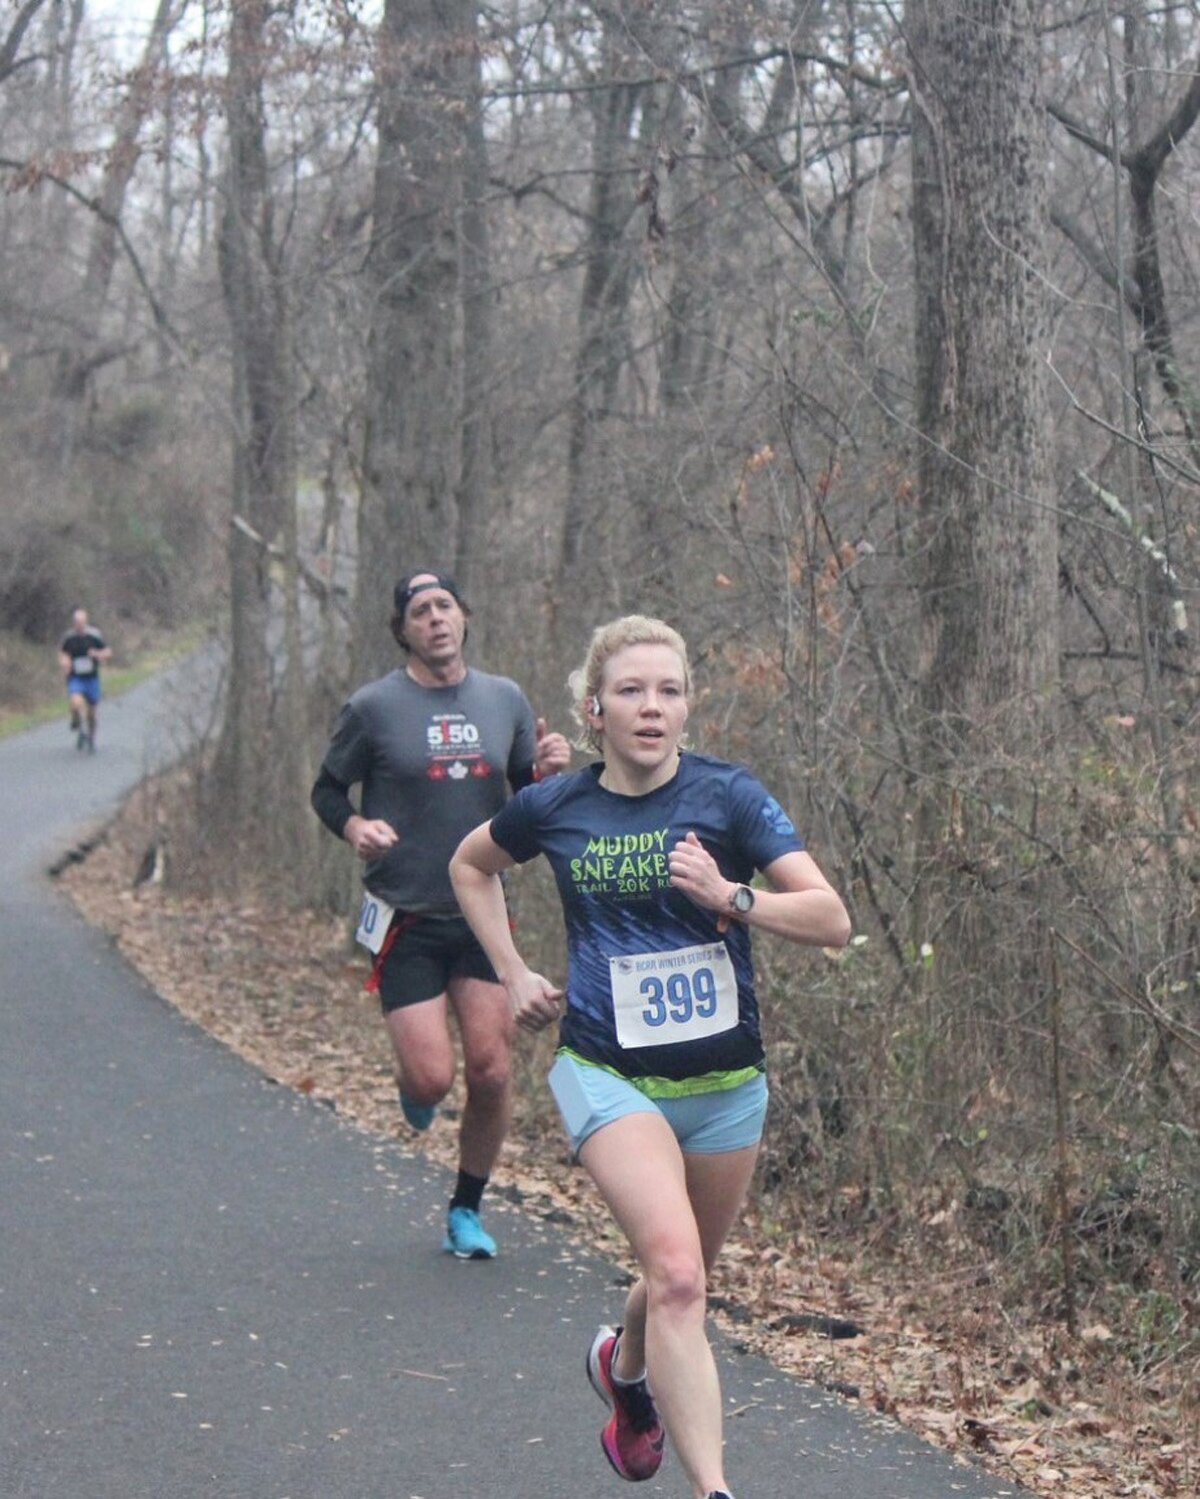 Brittany DeBord has experienced success both in the Bucks County Roadrunners Club’s Winter Series and the New York City Marathon.